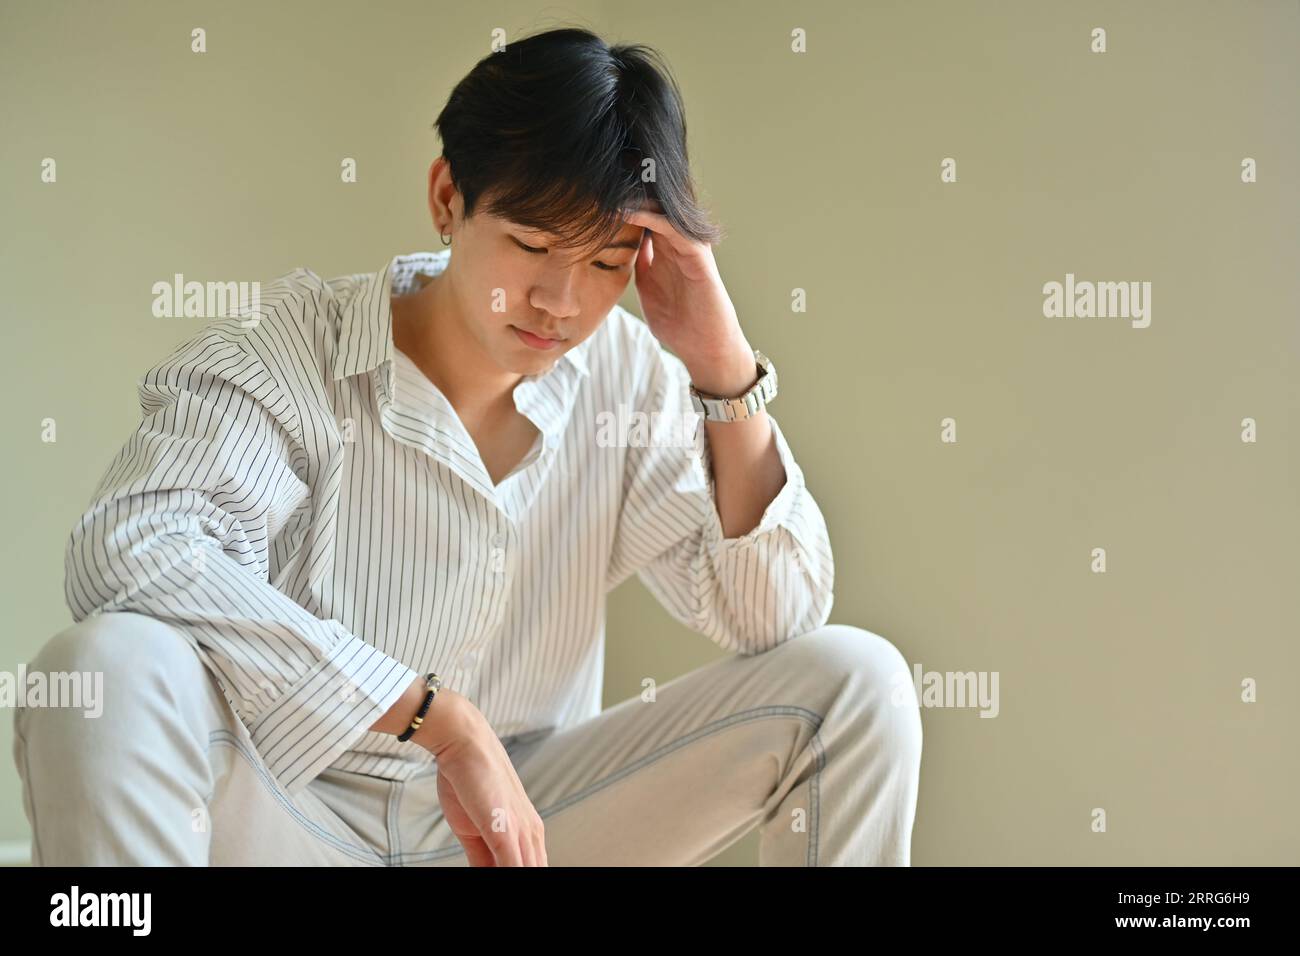 Unhappy young man holding his head, suffering from depression. Loneliness, depression, mental heath concept Stock Photo